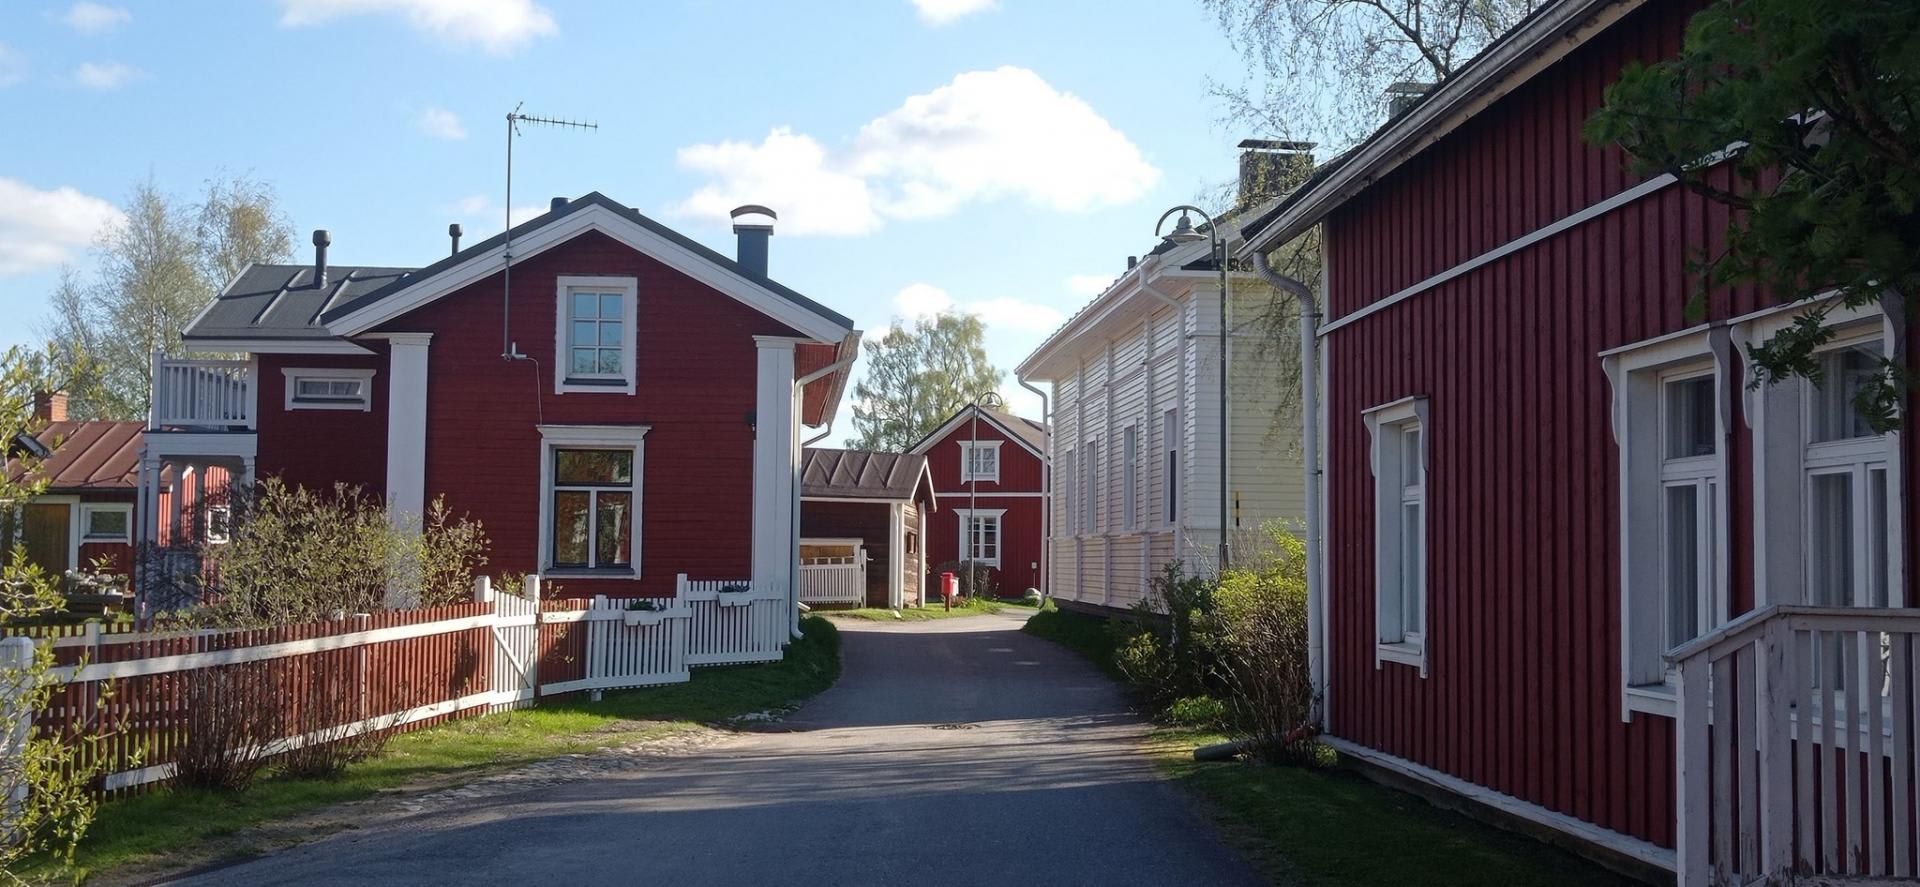 The Old Hamina district in Ii is a tight-knit neighbourhood that has managed to keep its own unique historical spirit.